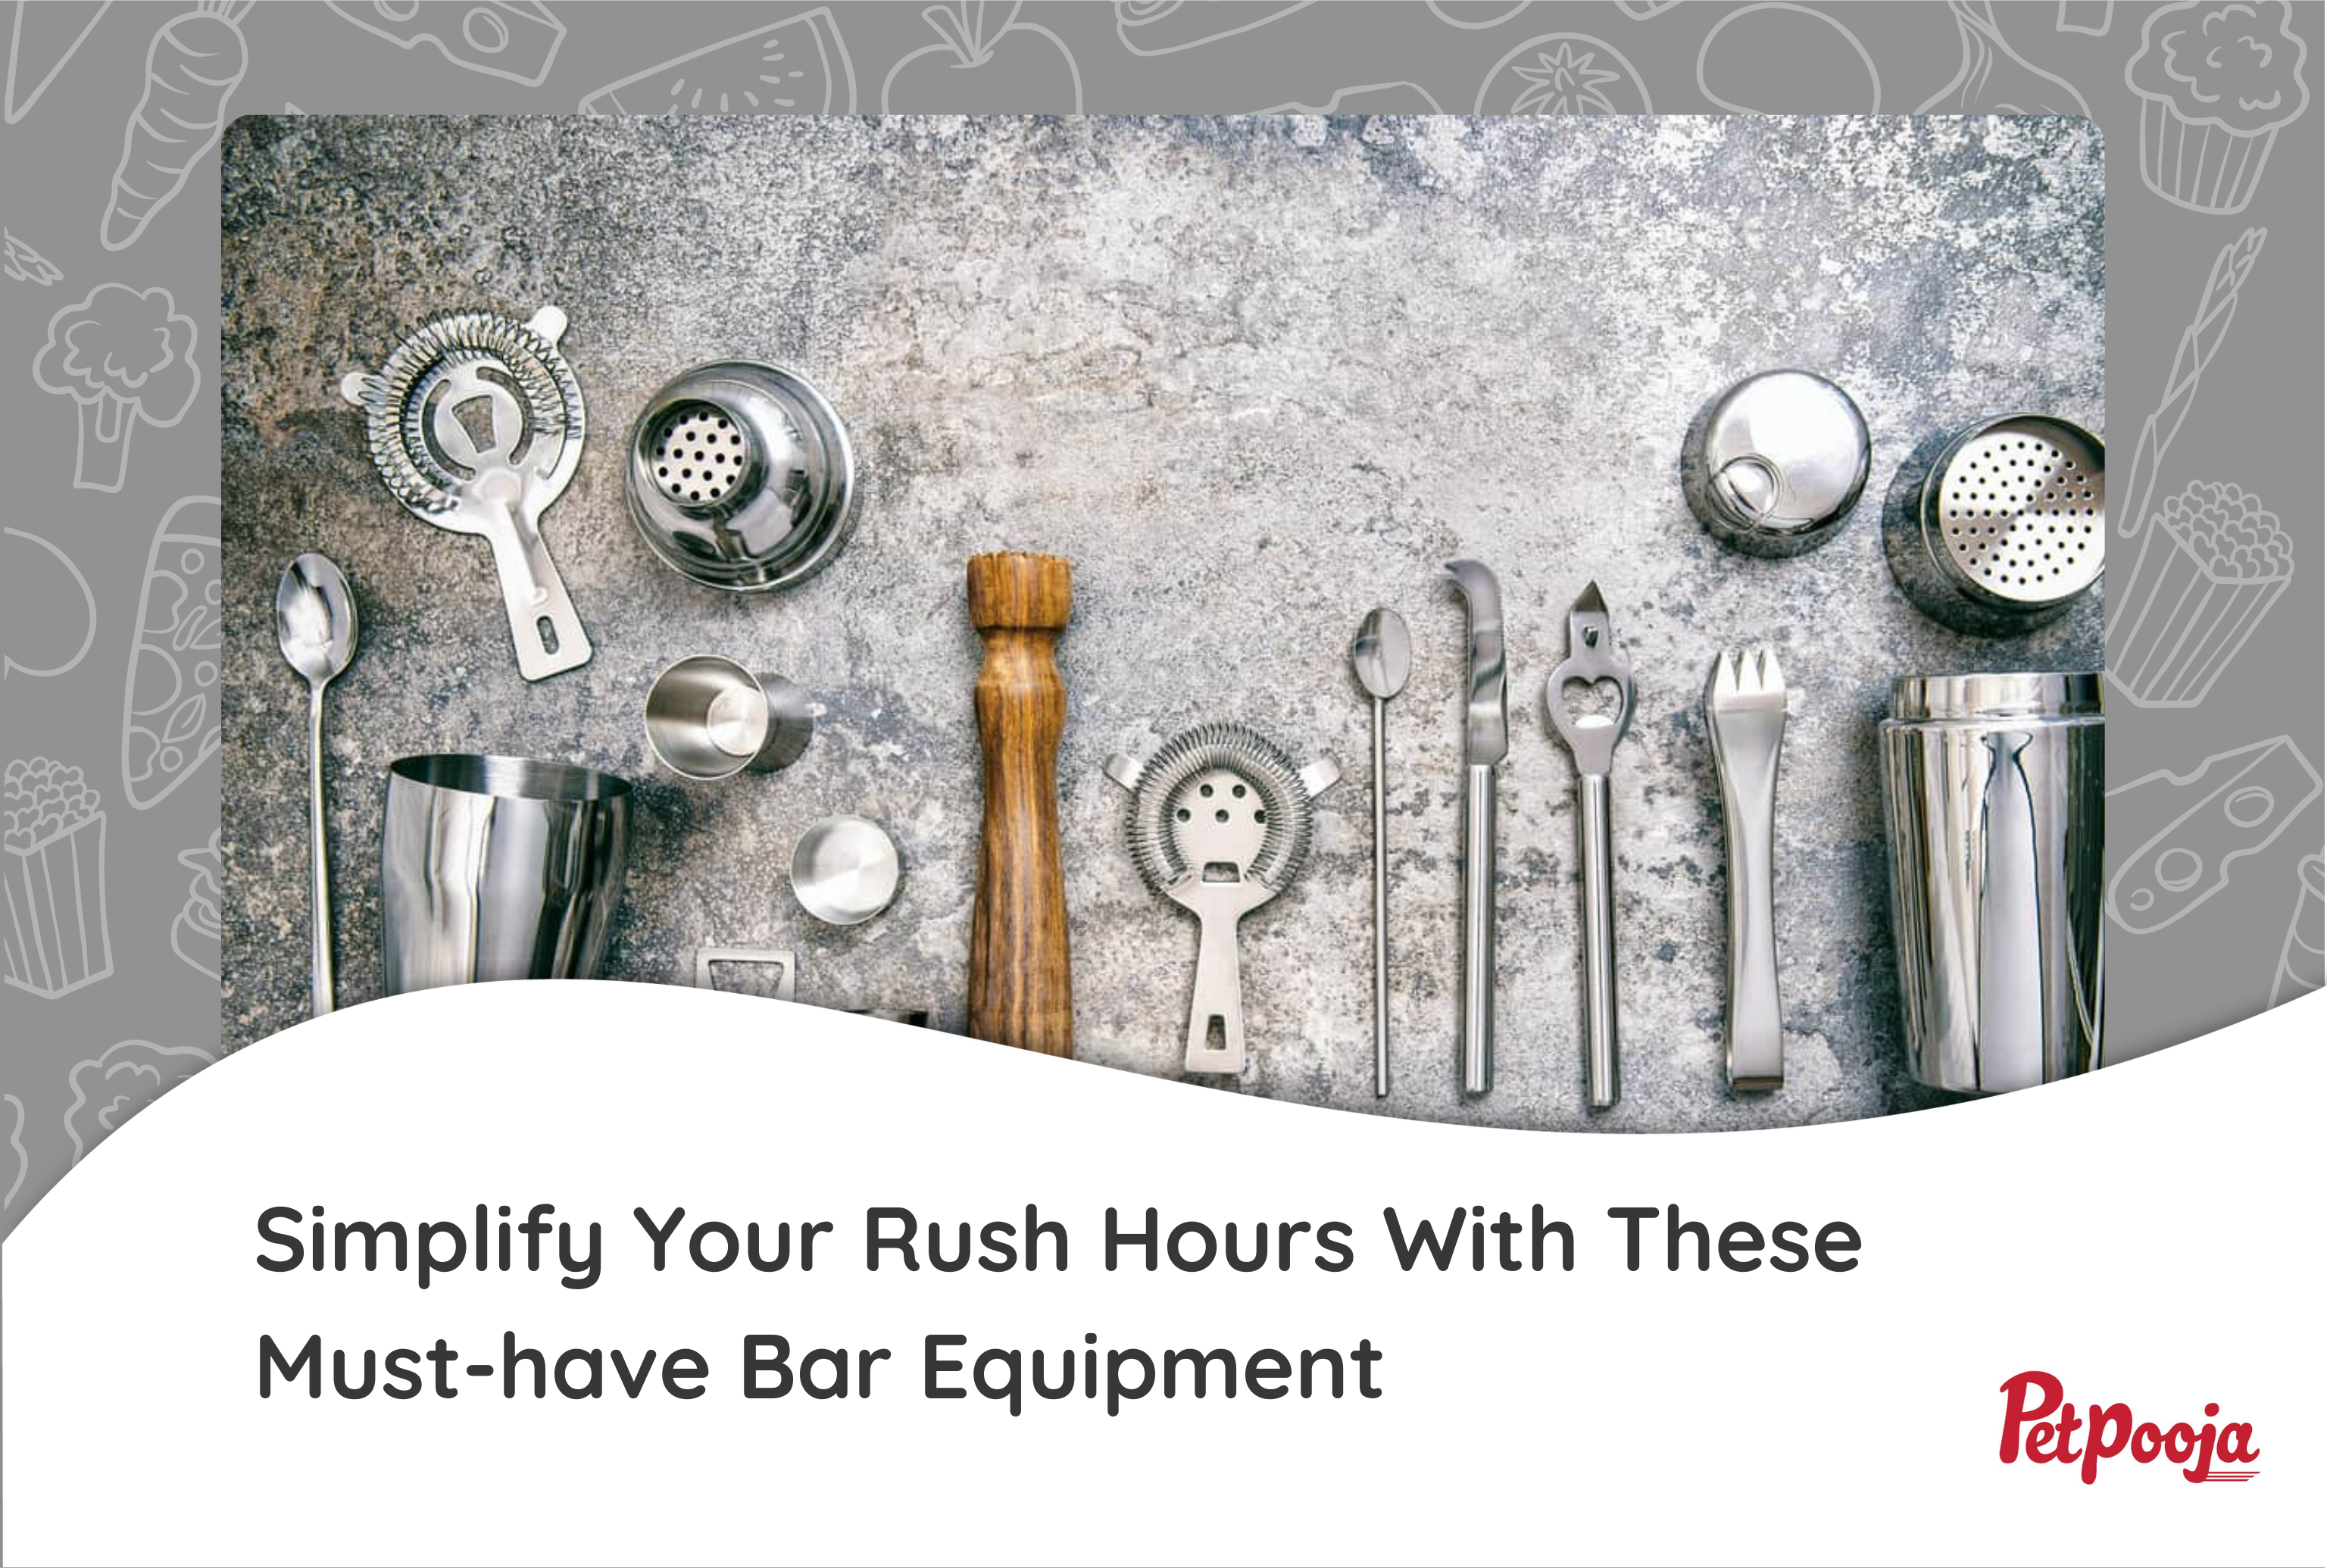 Know all the needed bar equipment